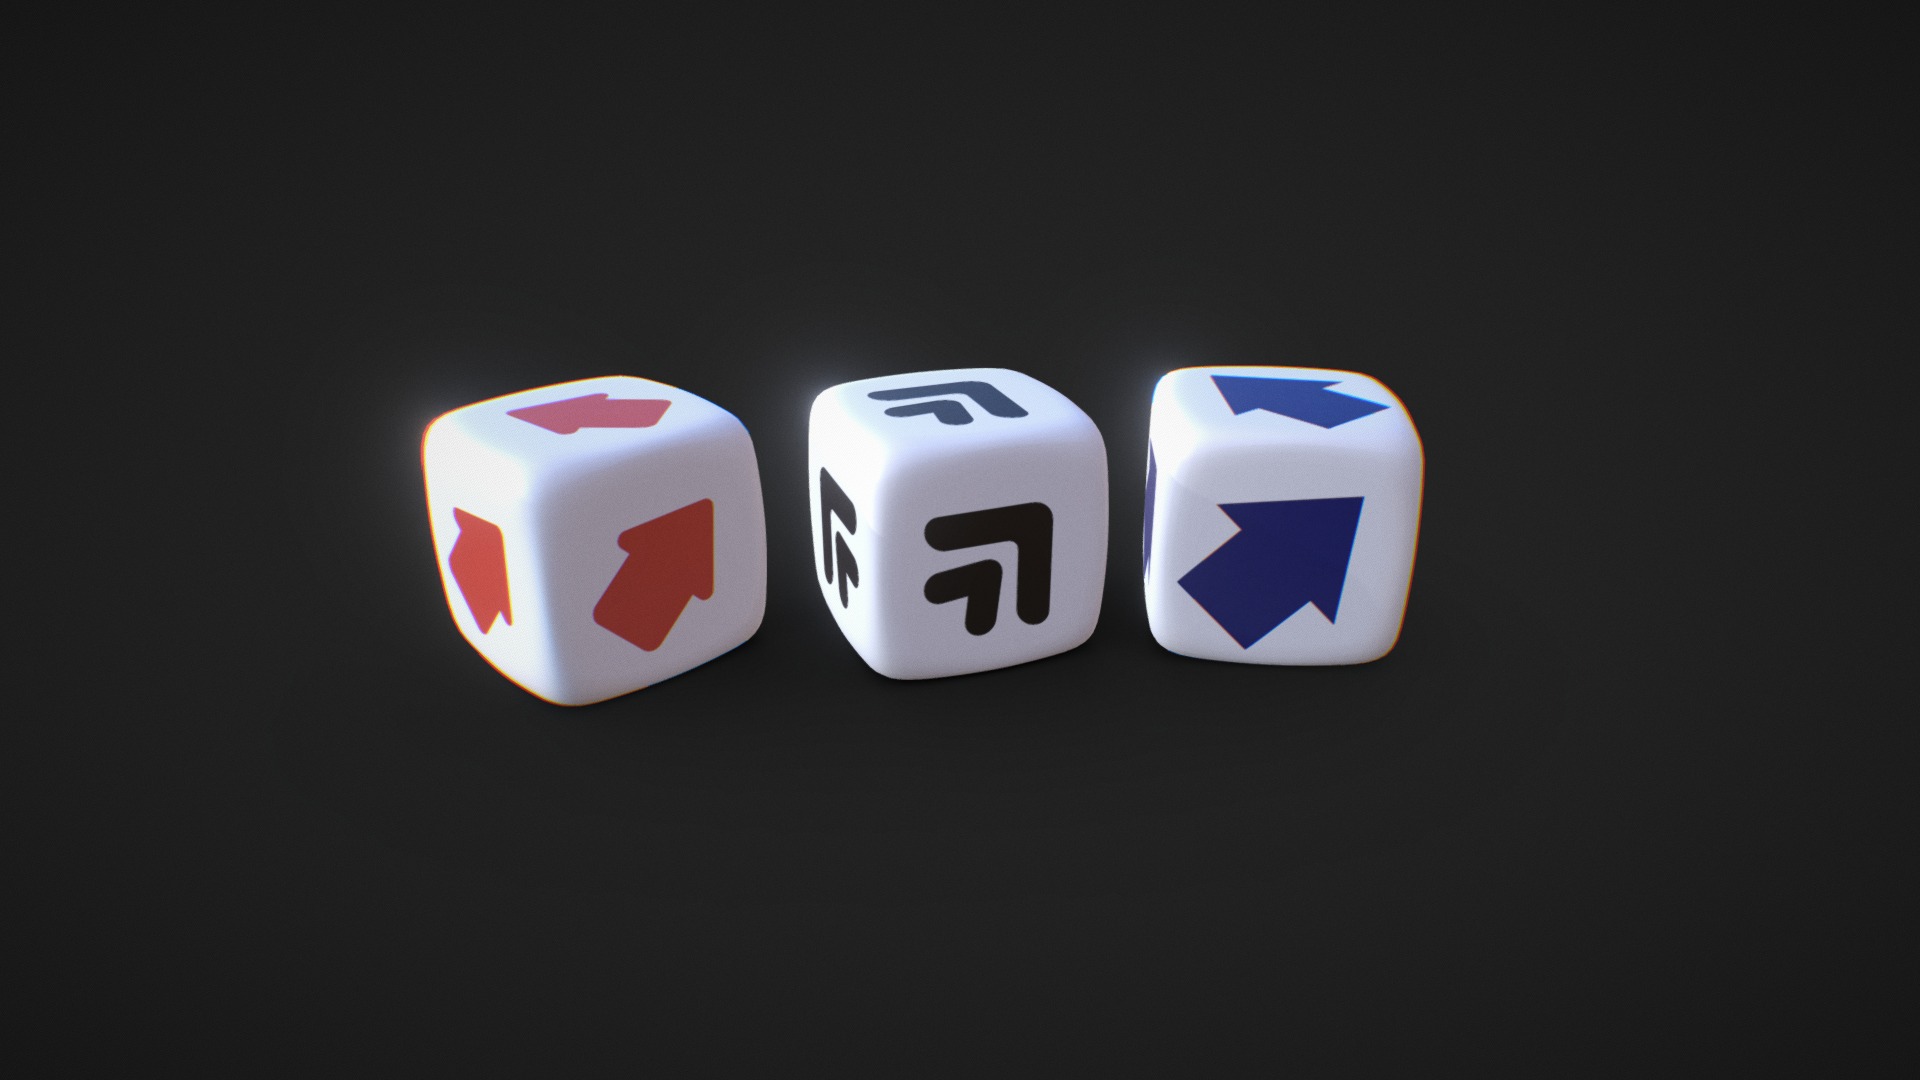 3D model Scatter Die Set - This is a 3D model of the Scatter Die Set. The 3D model is about a group of white and red dice.